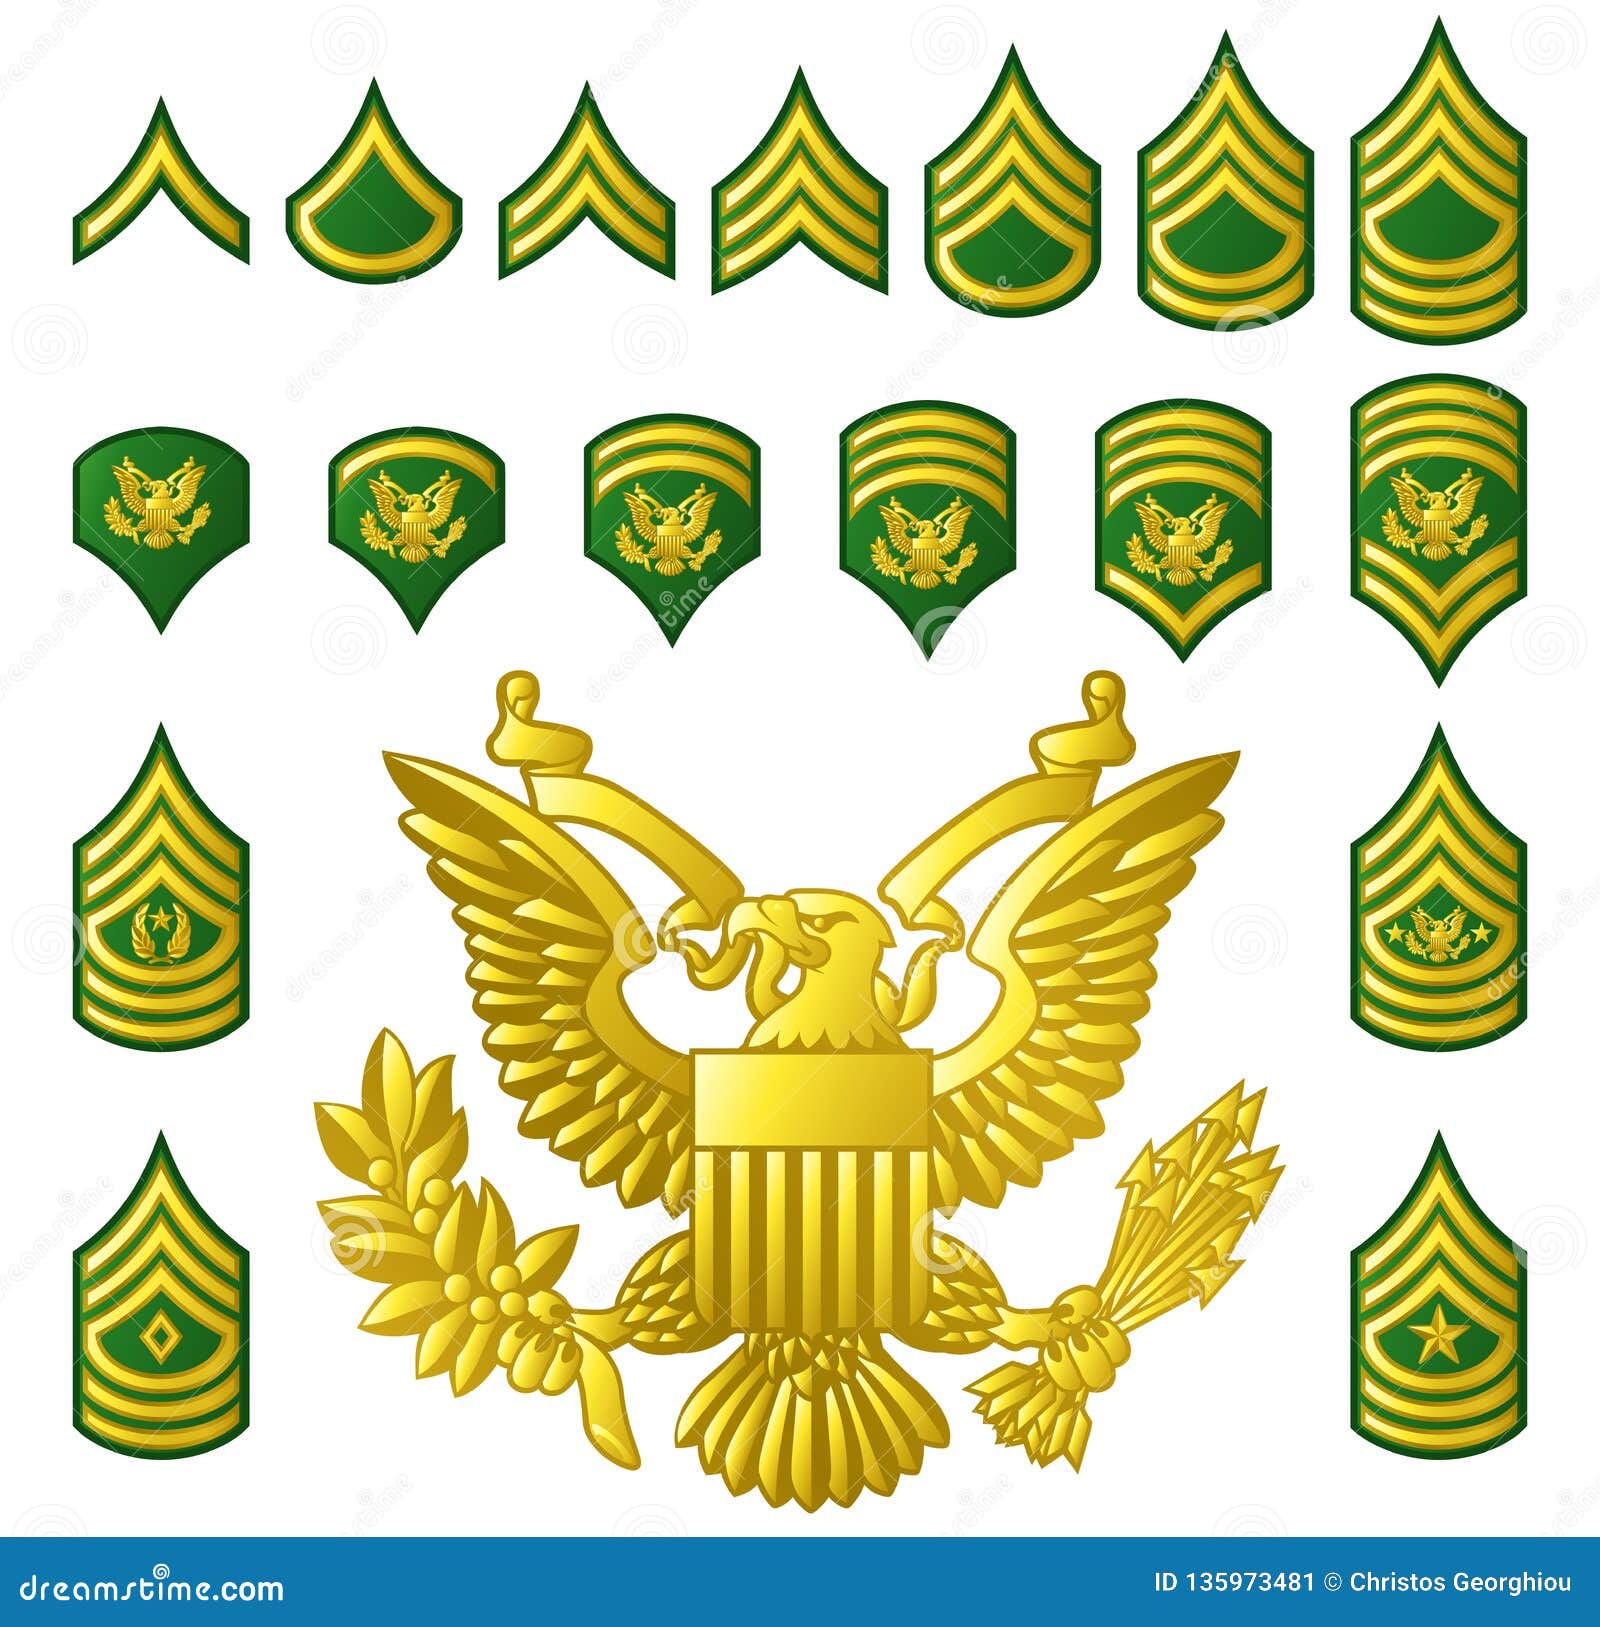 Military Army Enlisted Ranks Insignia Stock Vector Illustration Of